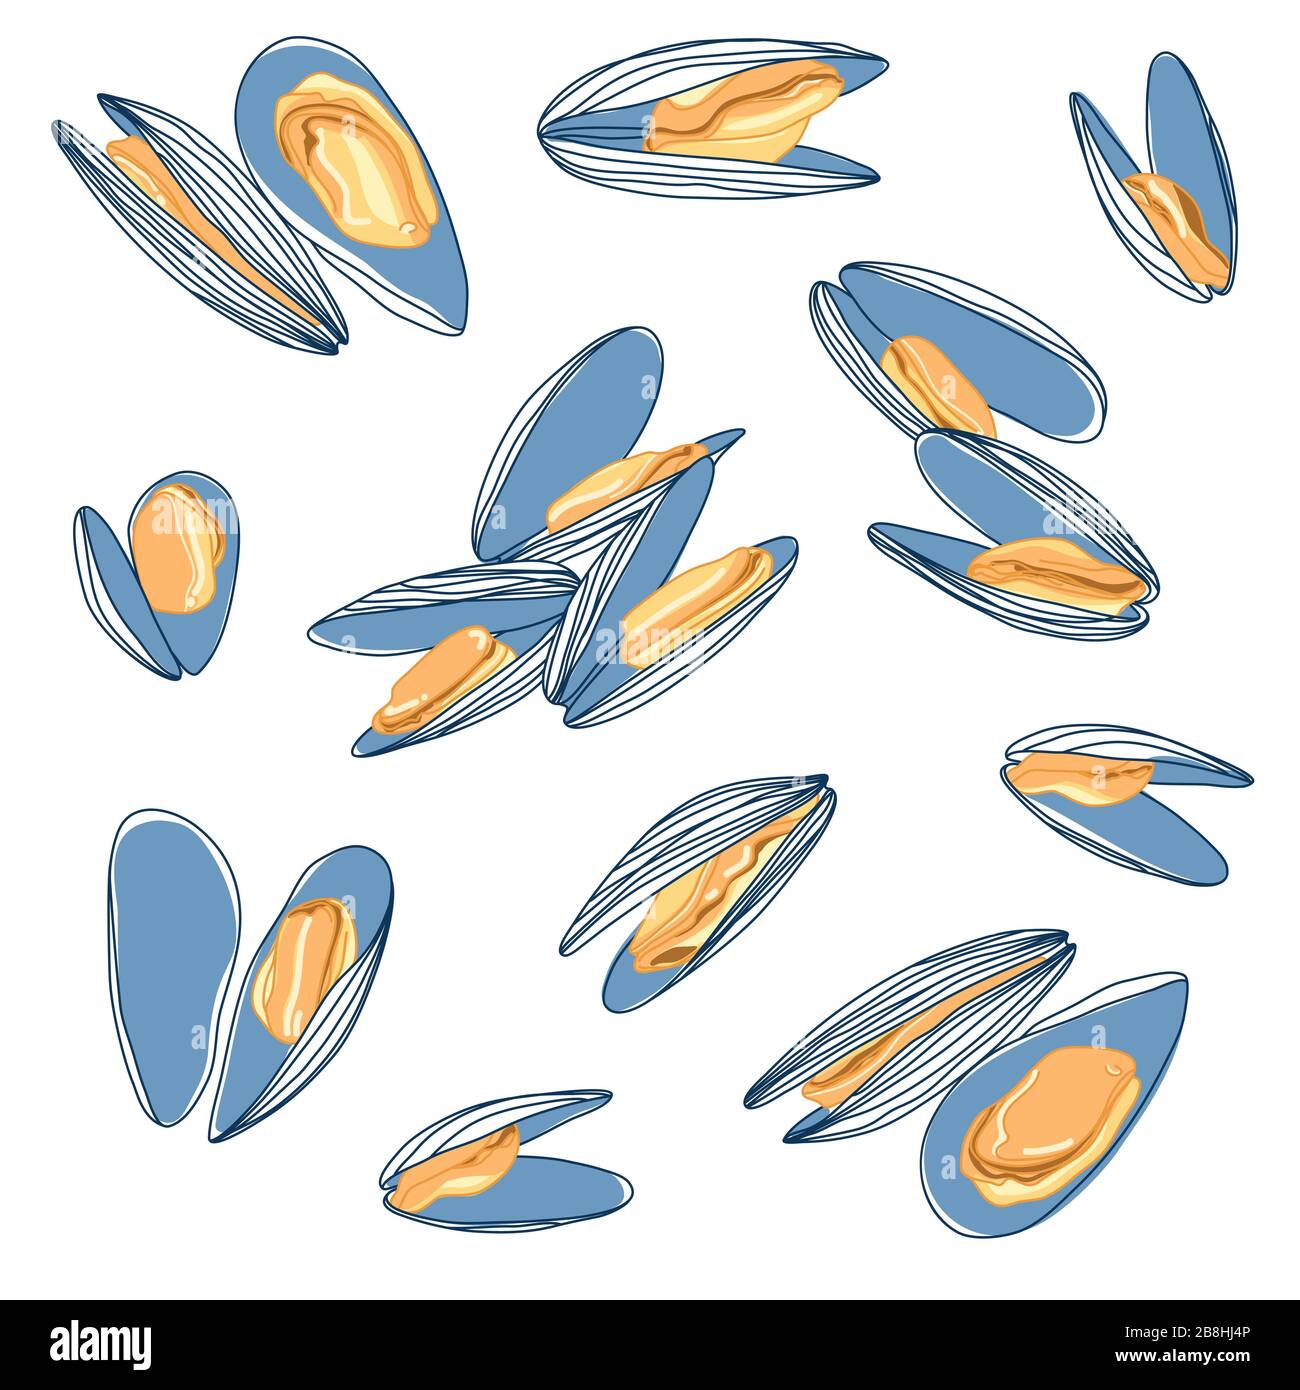 Collection of Blue and Orange Mussels Sketch Design. Seafood Drawing. Gourmand Restaurant Food Stock Vector